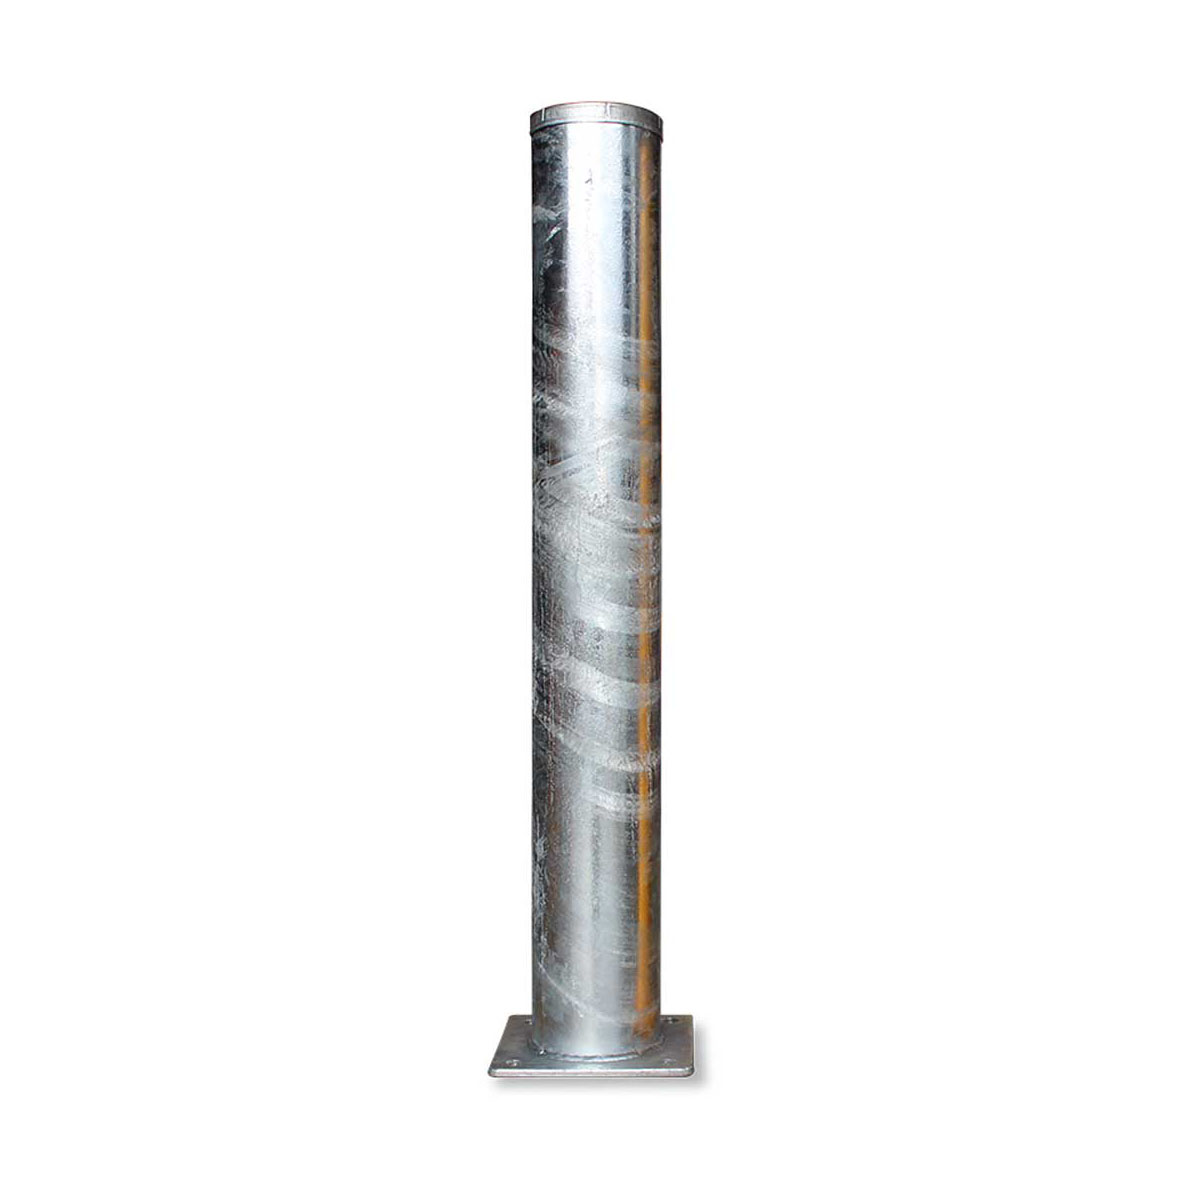 Buy Bolt-down Bollard - HD (Galvanised) in Bolt-down Bollards from GuardX available at Astrolift NZ